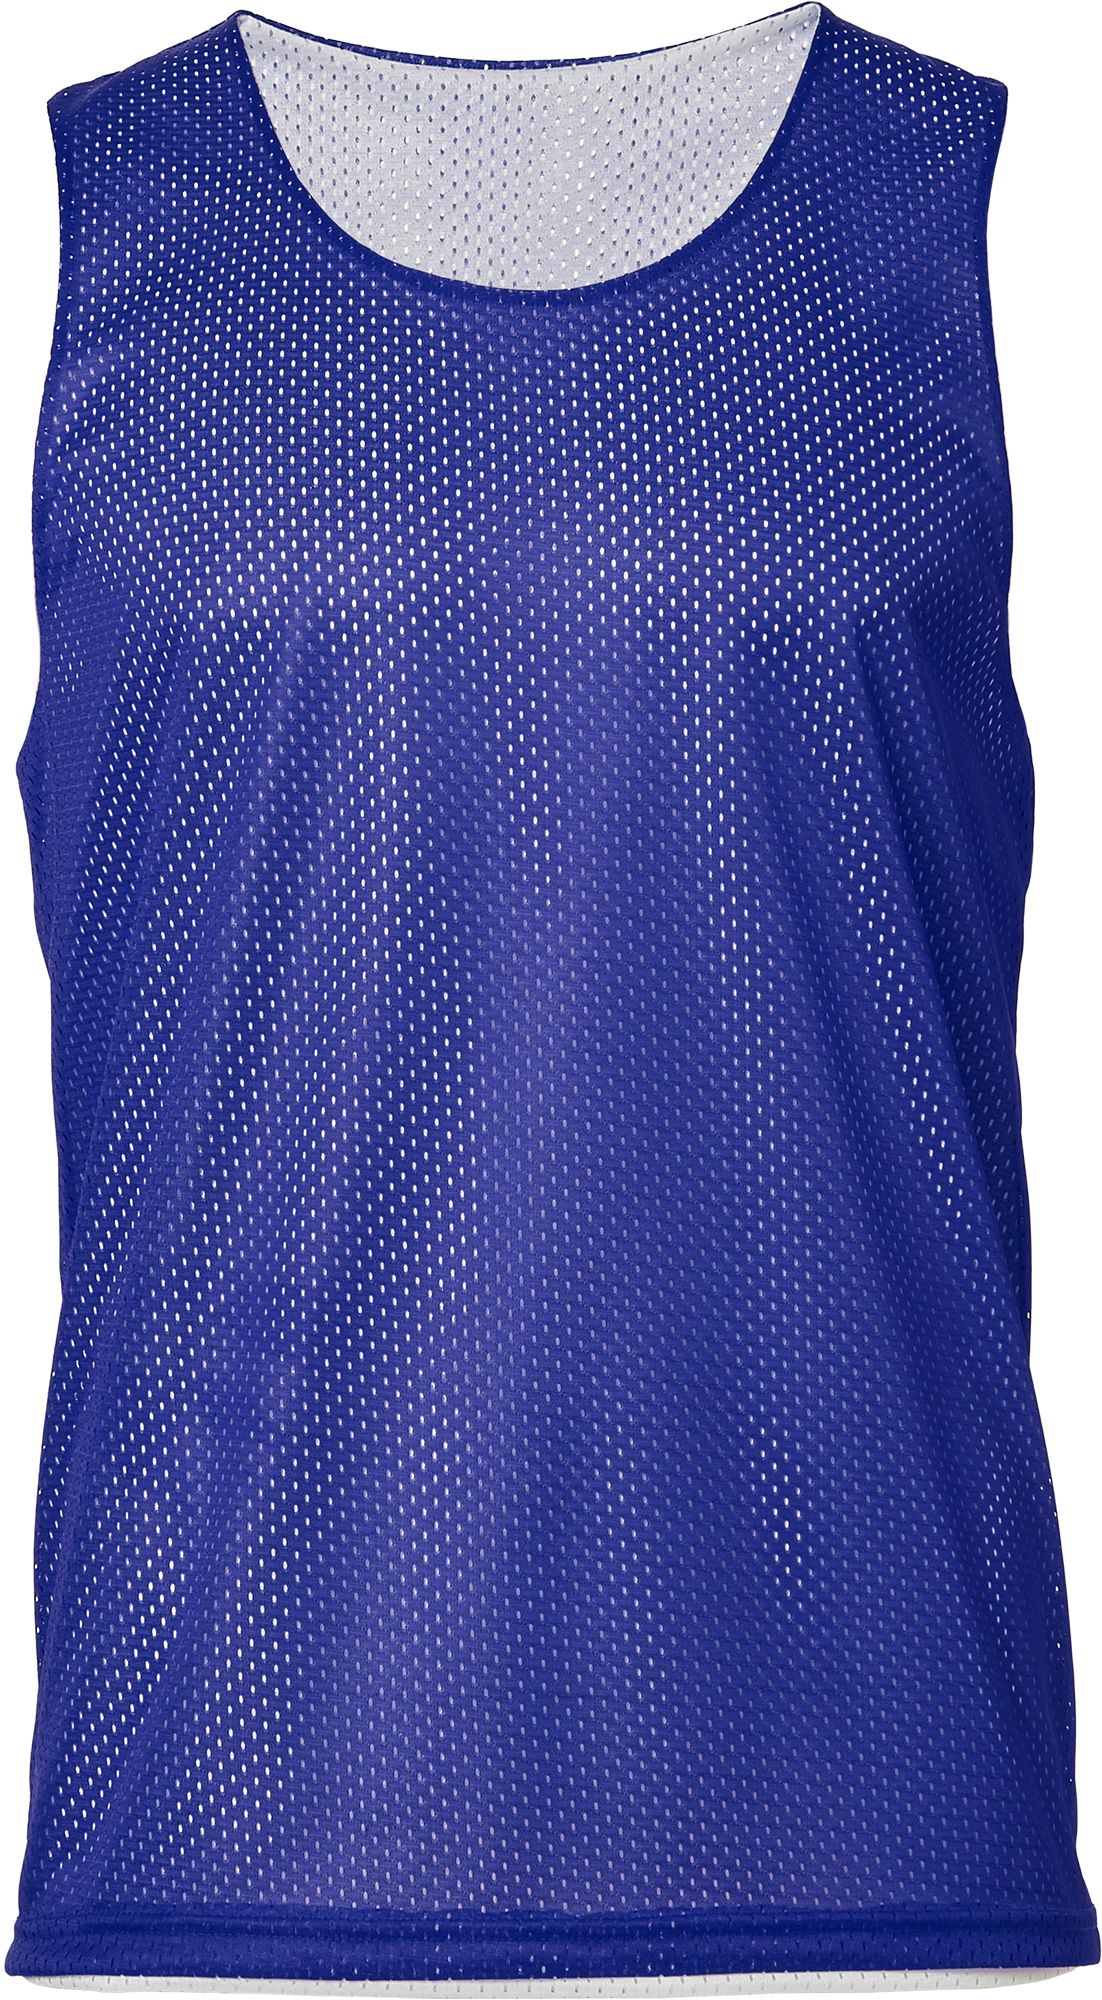 penny jersey for soccer